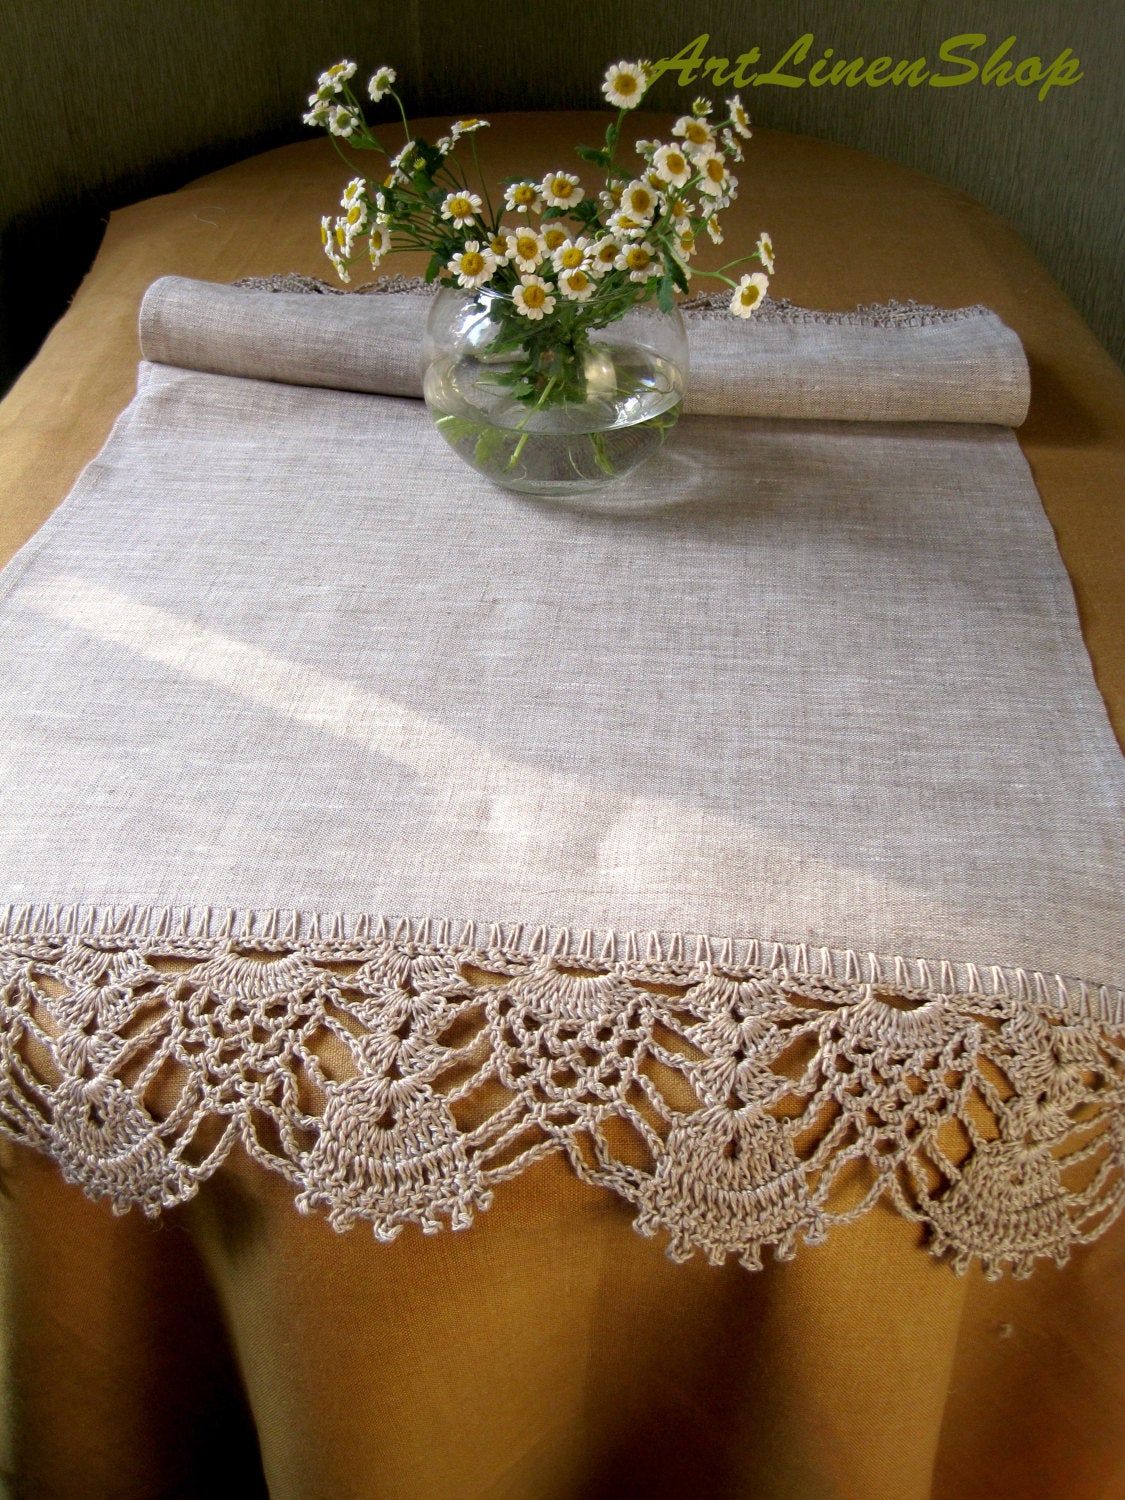 Crochet-doily-Lace-tablecloth-Linen-table-runners-Gray-linens-Rustic.jpg